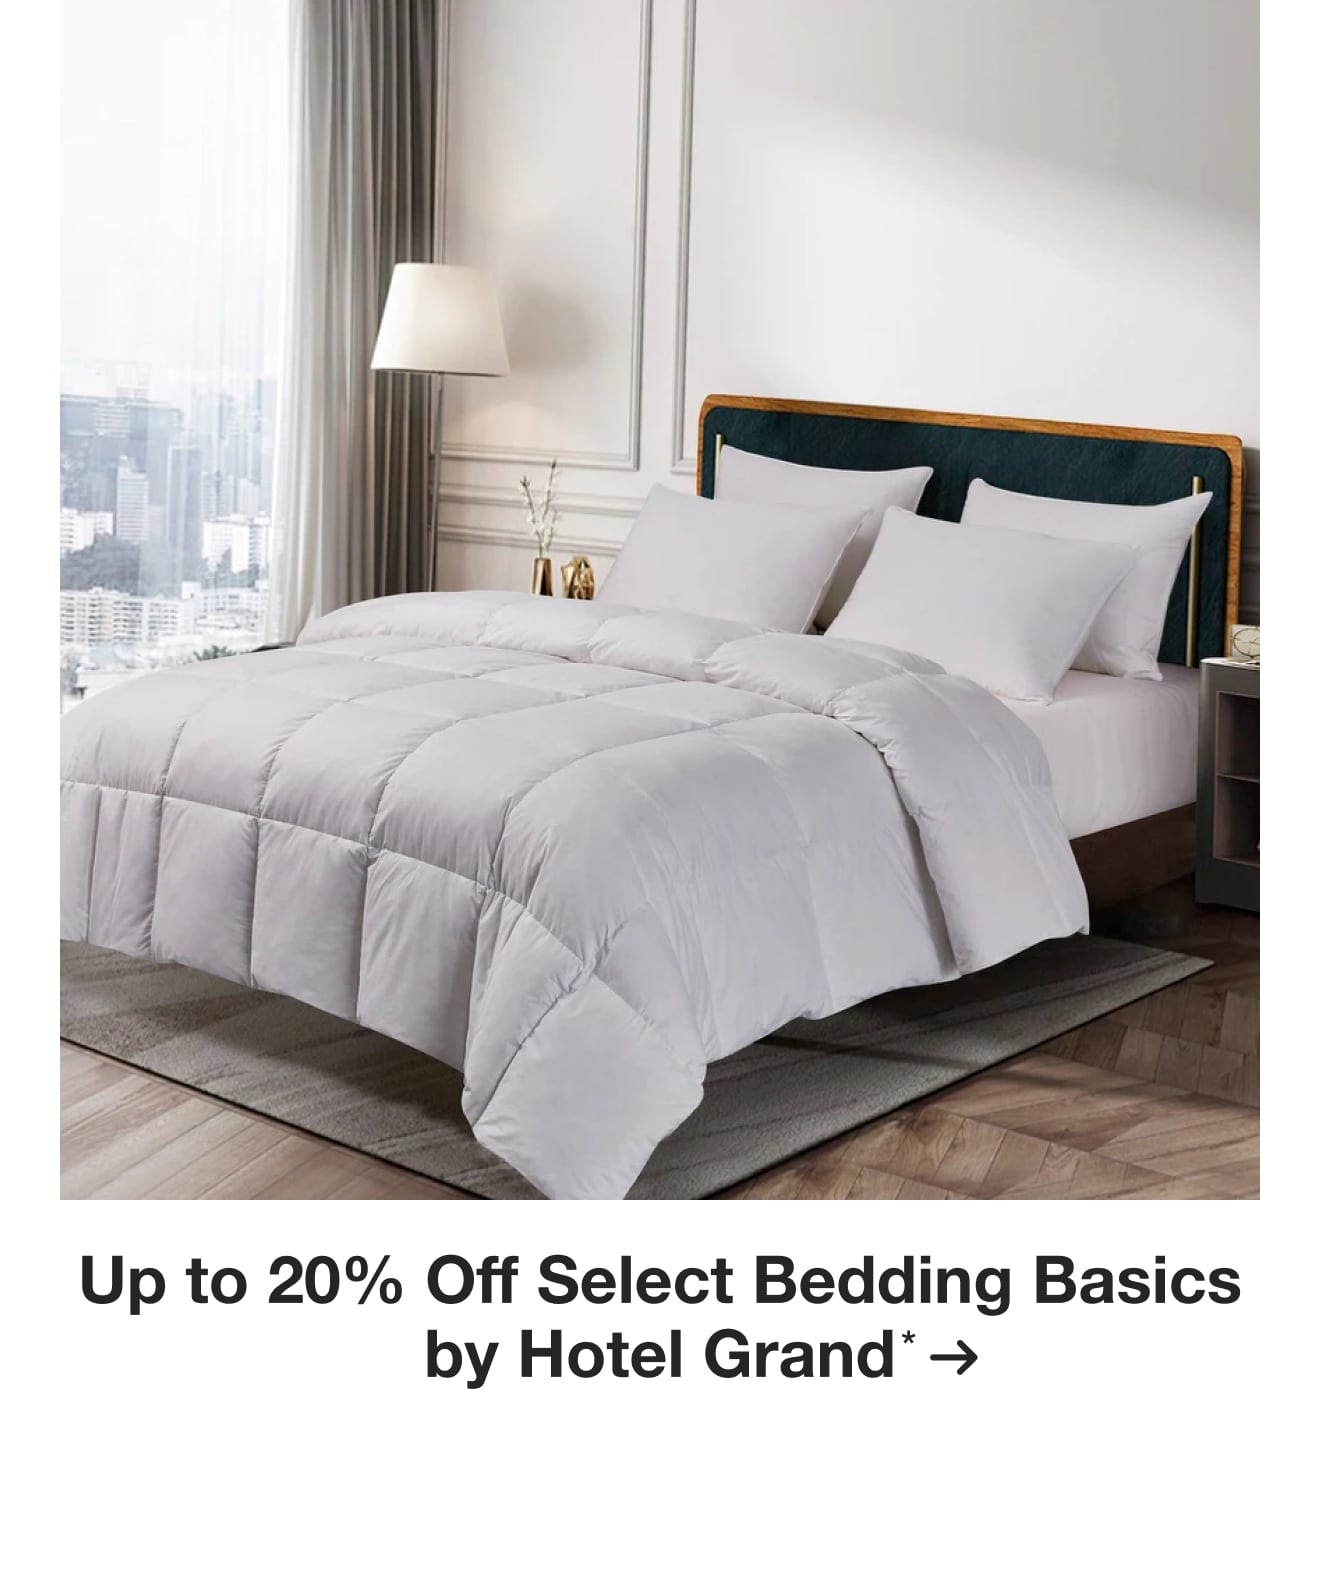 Up to 20% Off Select Bedding Basics by Hotel Grand*